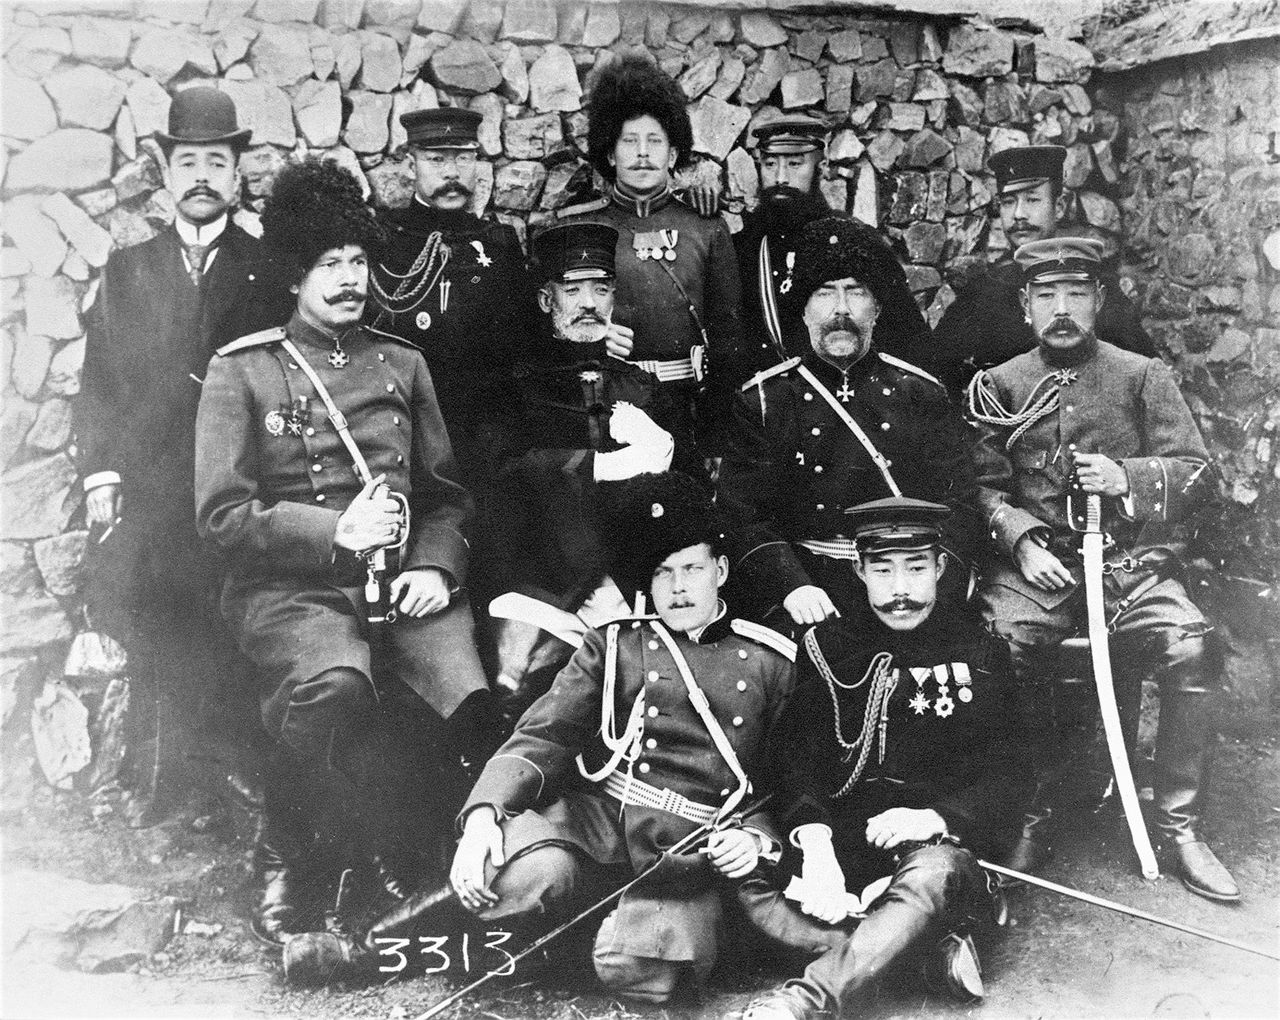 Photograph of Japanese and Russian officials after the meeting of Japanese General Nogi Maresuke (center row, second from left) and Russian General Anatoly Stessel (center row, second from right) on January 5, 1905, following the fall of Lushun. (© Jiji)